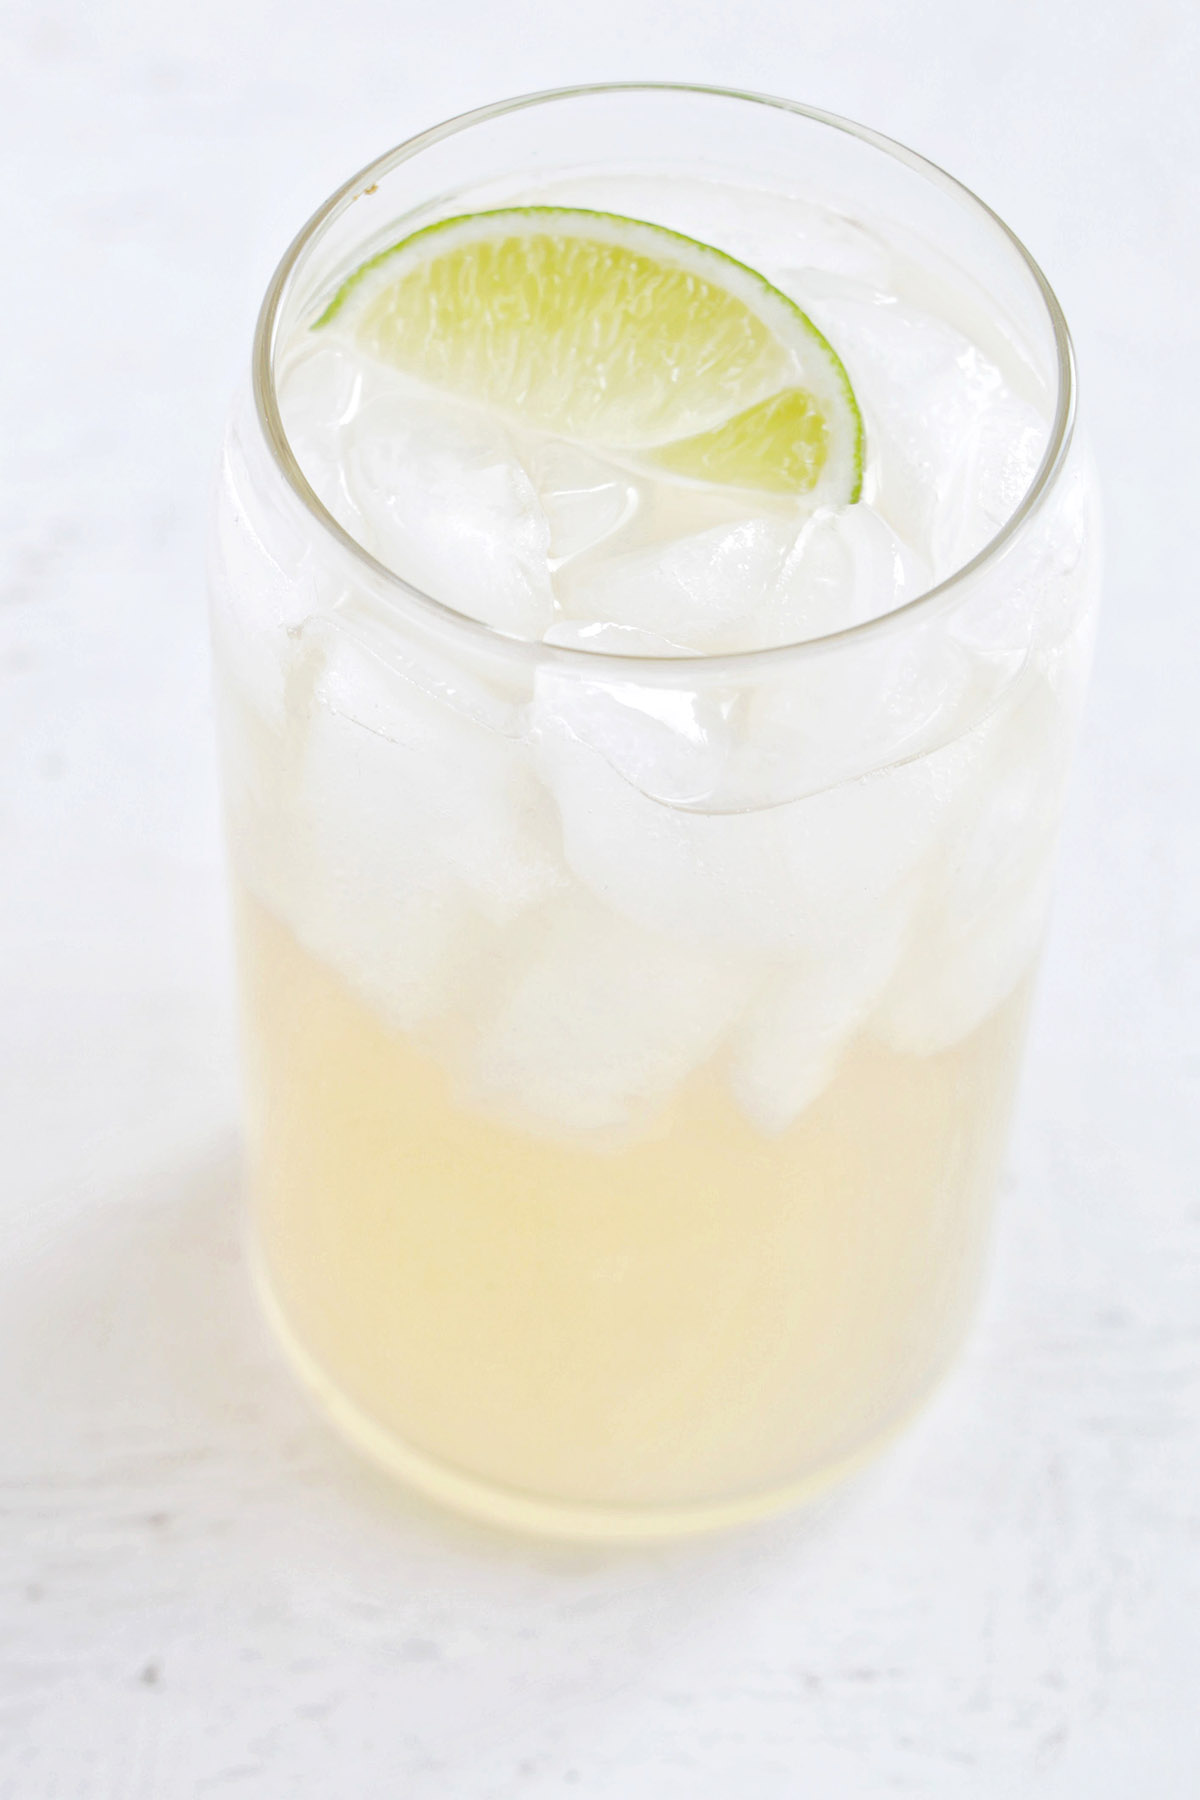 rum juice cocktail with lime garnish.